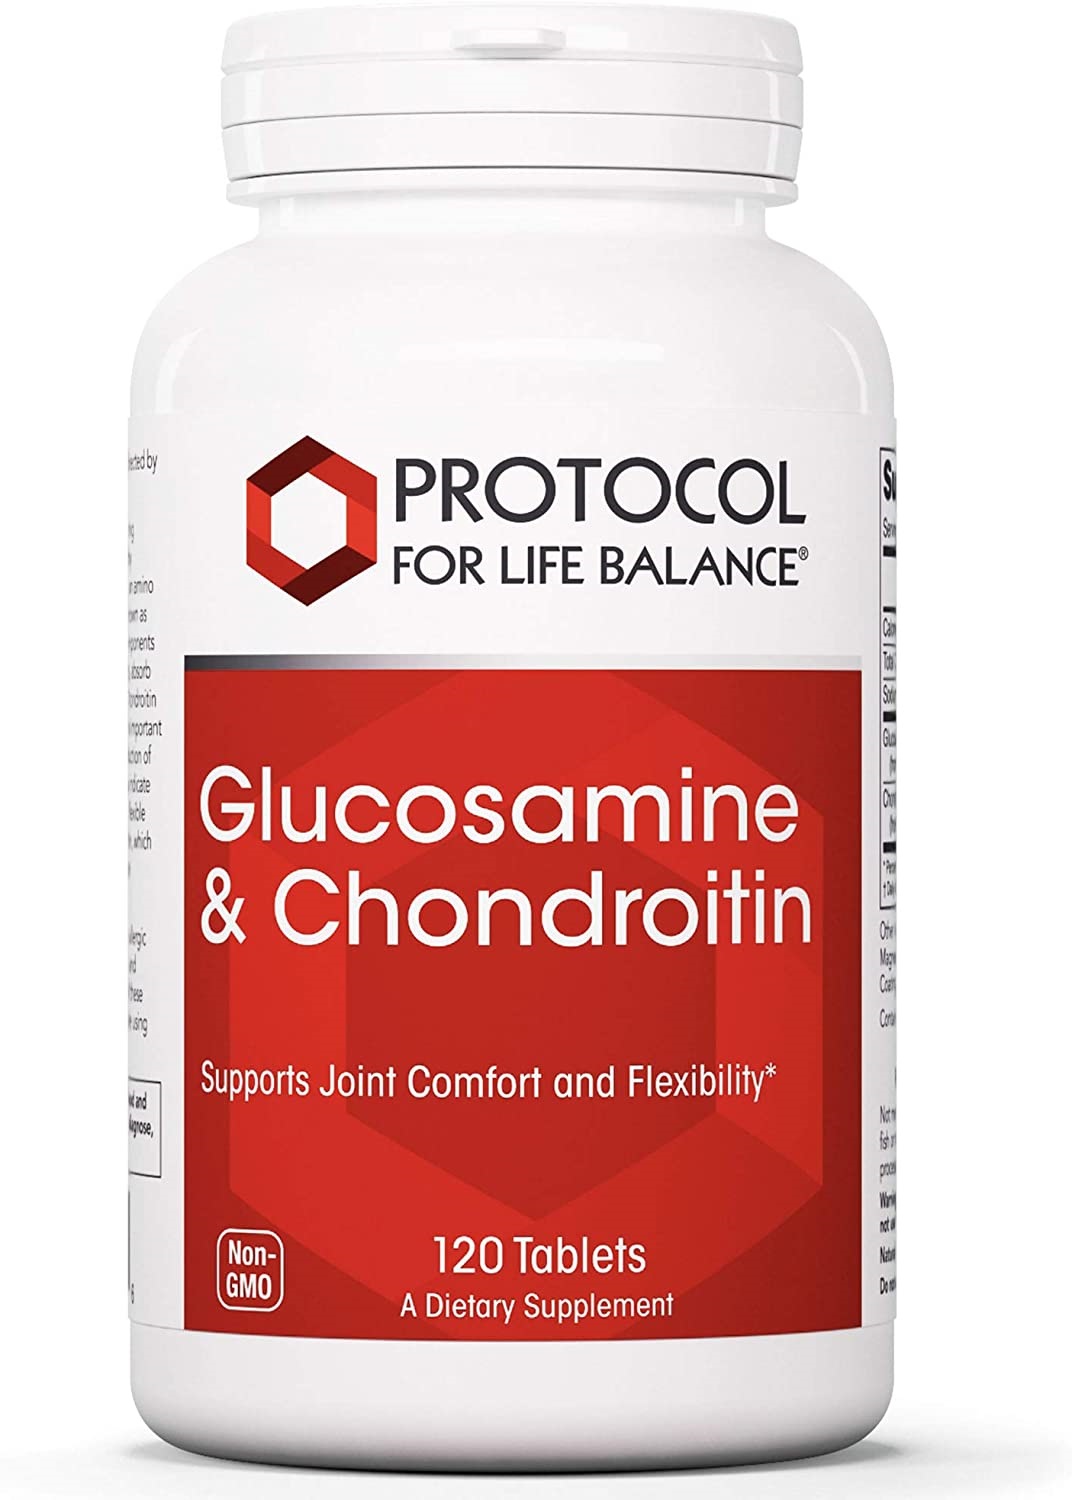 Glucosamine & Chondroitin by Protocol for Life Balance 120 tabs